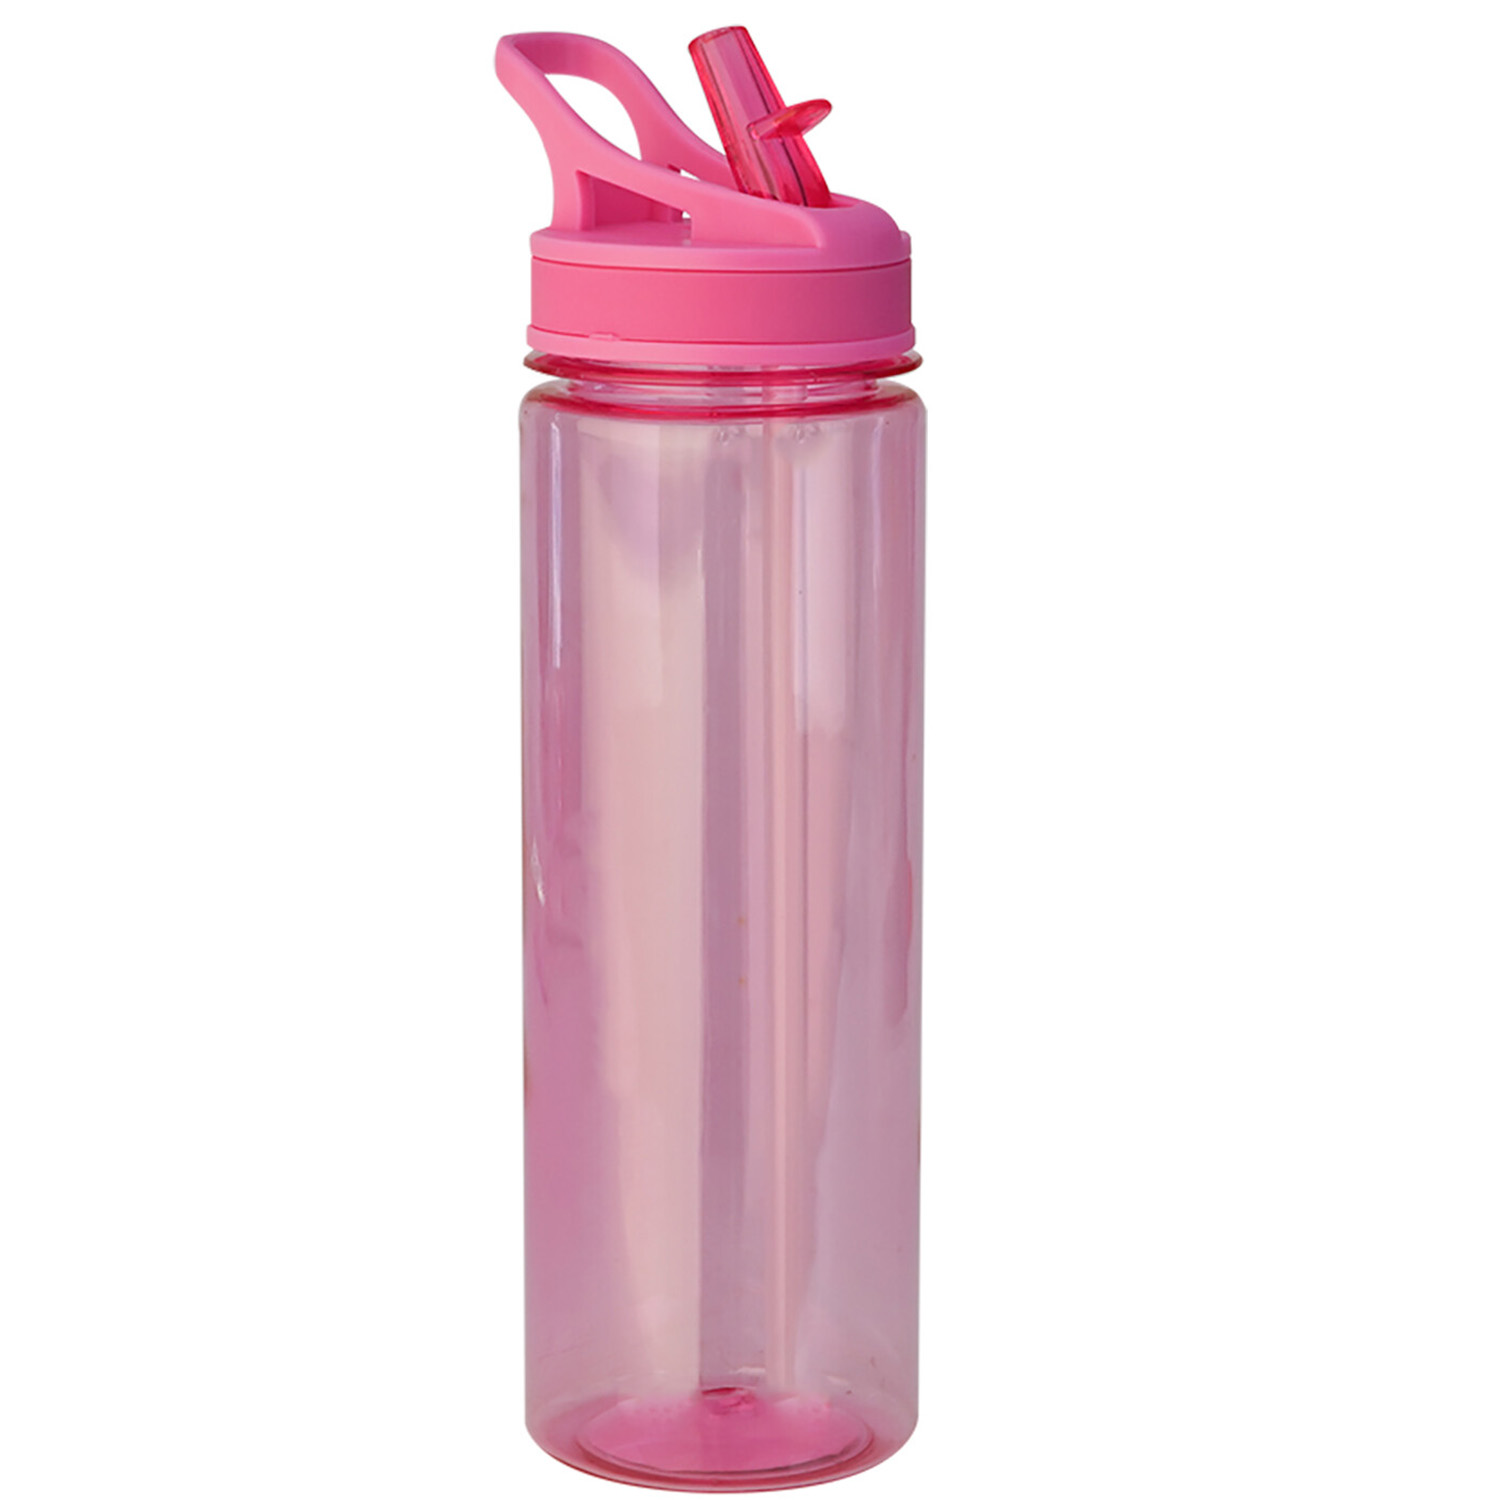 Large Sports Water Bottle with Straw Image